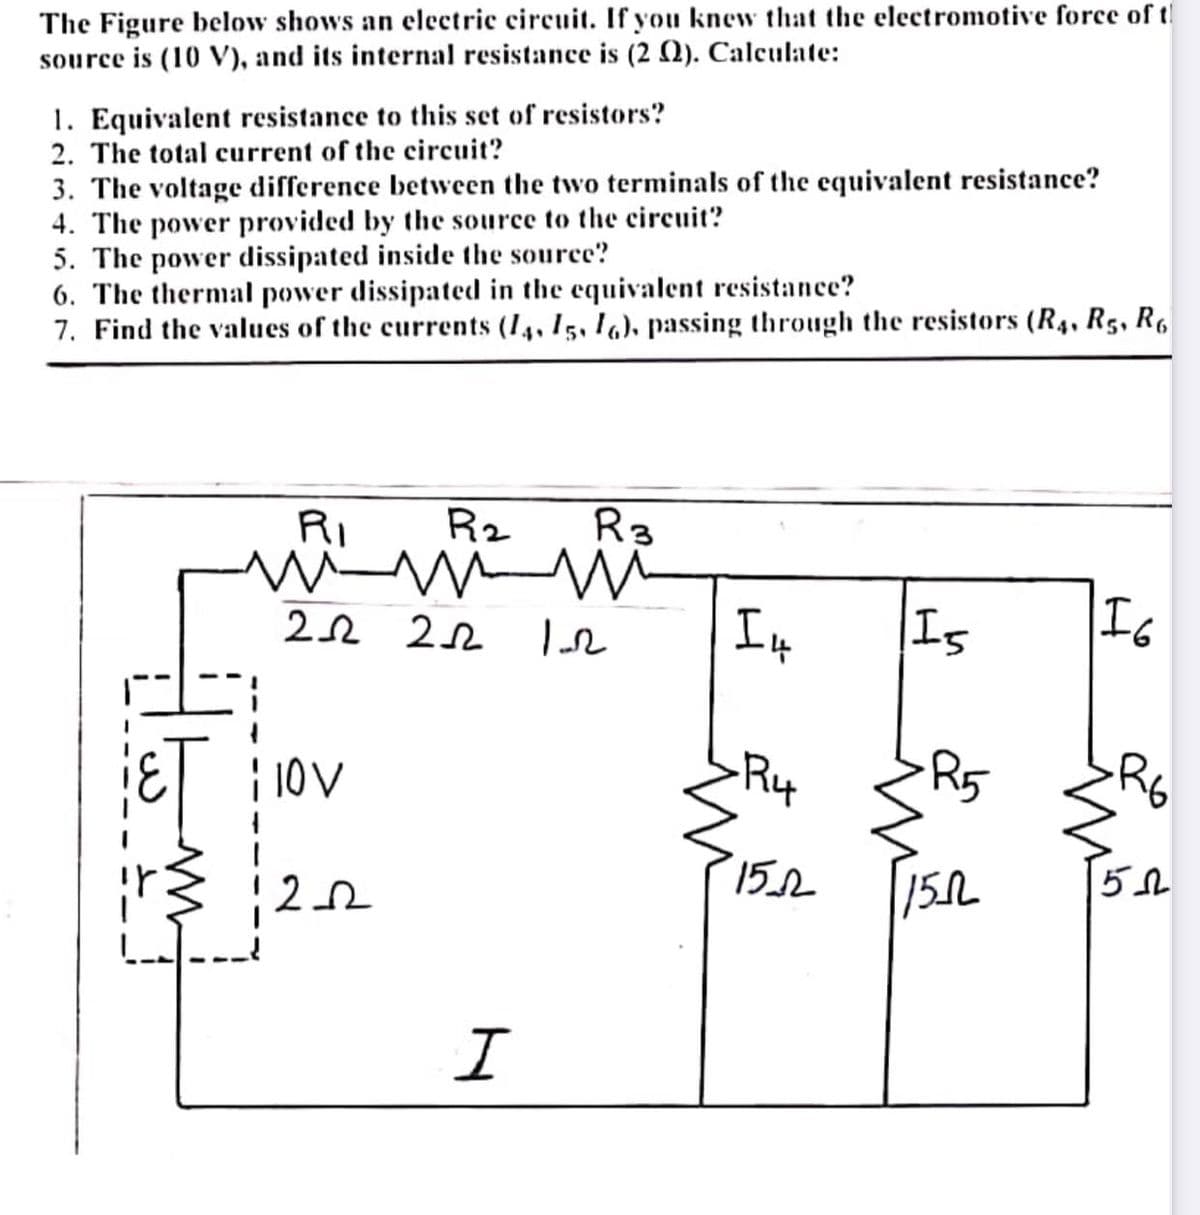 The Figure below shows an electric circuit. If you knew that the electromotive force of t!
source is (10 V), and its internal resistance is (2 N). Calculate:
1. Equivalent resistance to this set of resistors?
2. The total current of the circuit?
3. The voltage difference between the two terminals of the equivalent resistance?
4. The power provided by the source to the circuit?
5. The power dissipated inside the source?
6. The thermal power dissipated in the equivalent resistance?
7. Find the values of the currents (14, 15, I6), passing through the resistors (R4, R5, R6
RI
Rz
R3
22 22
Is
| 10V
R5
R6
15.2
15L
I
